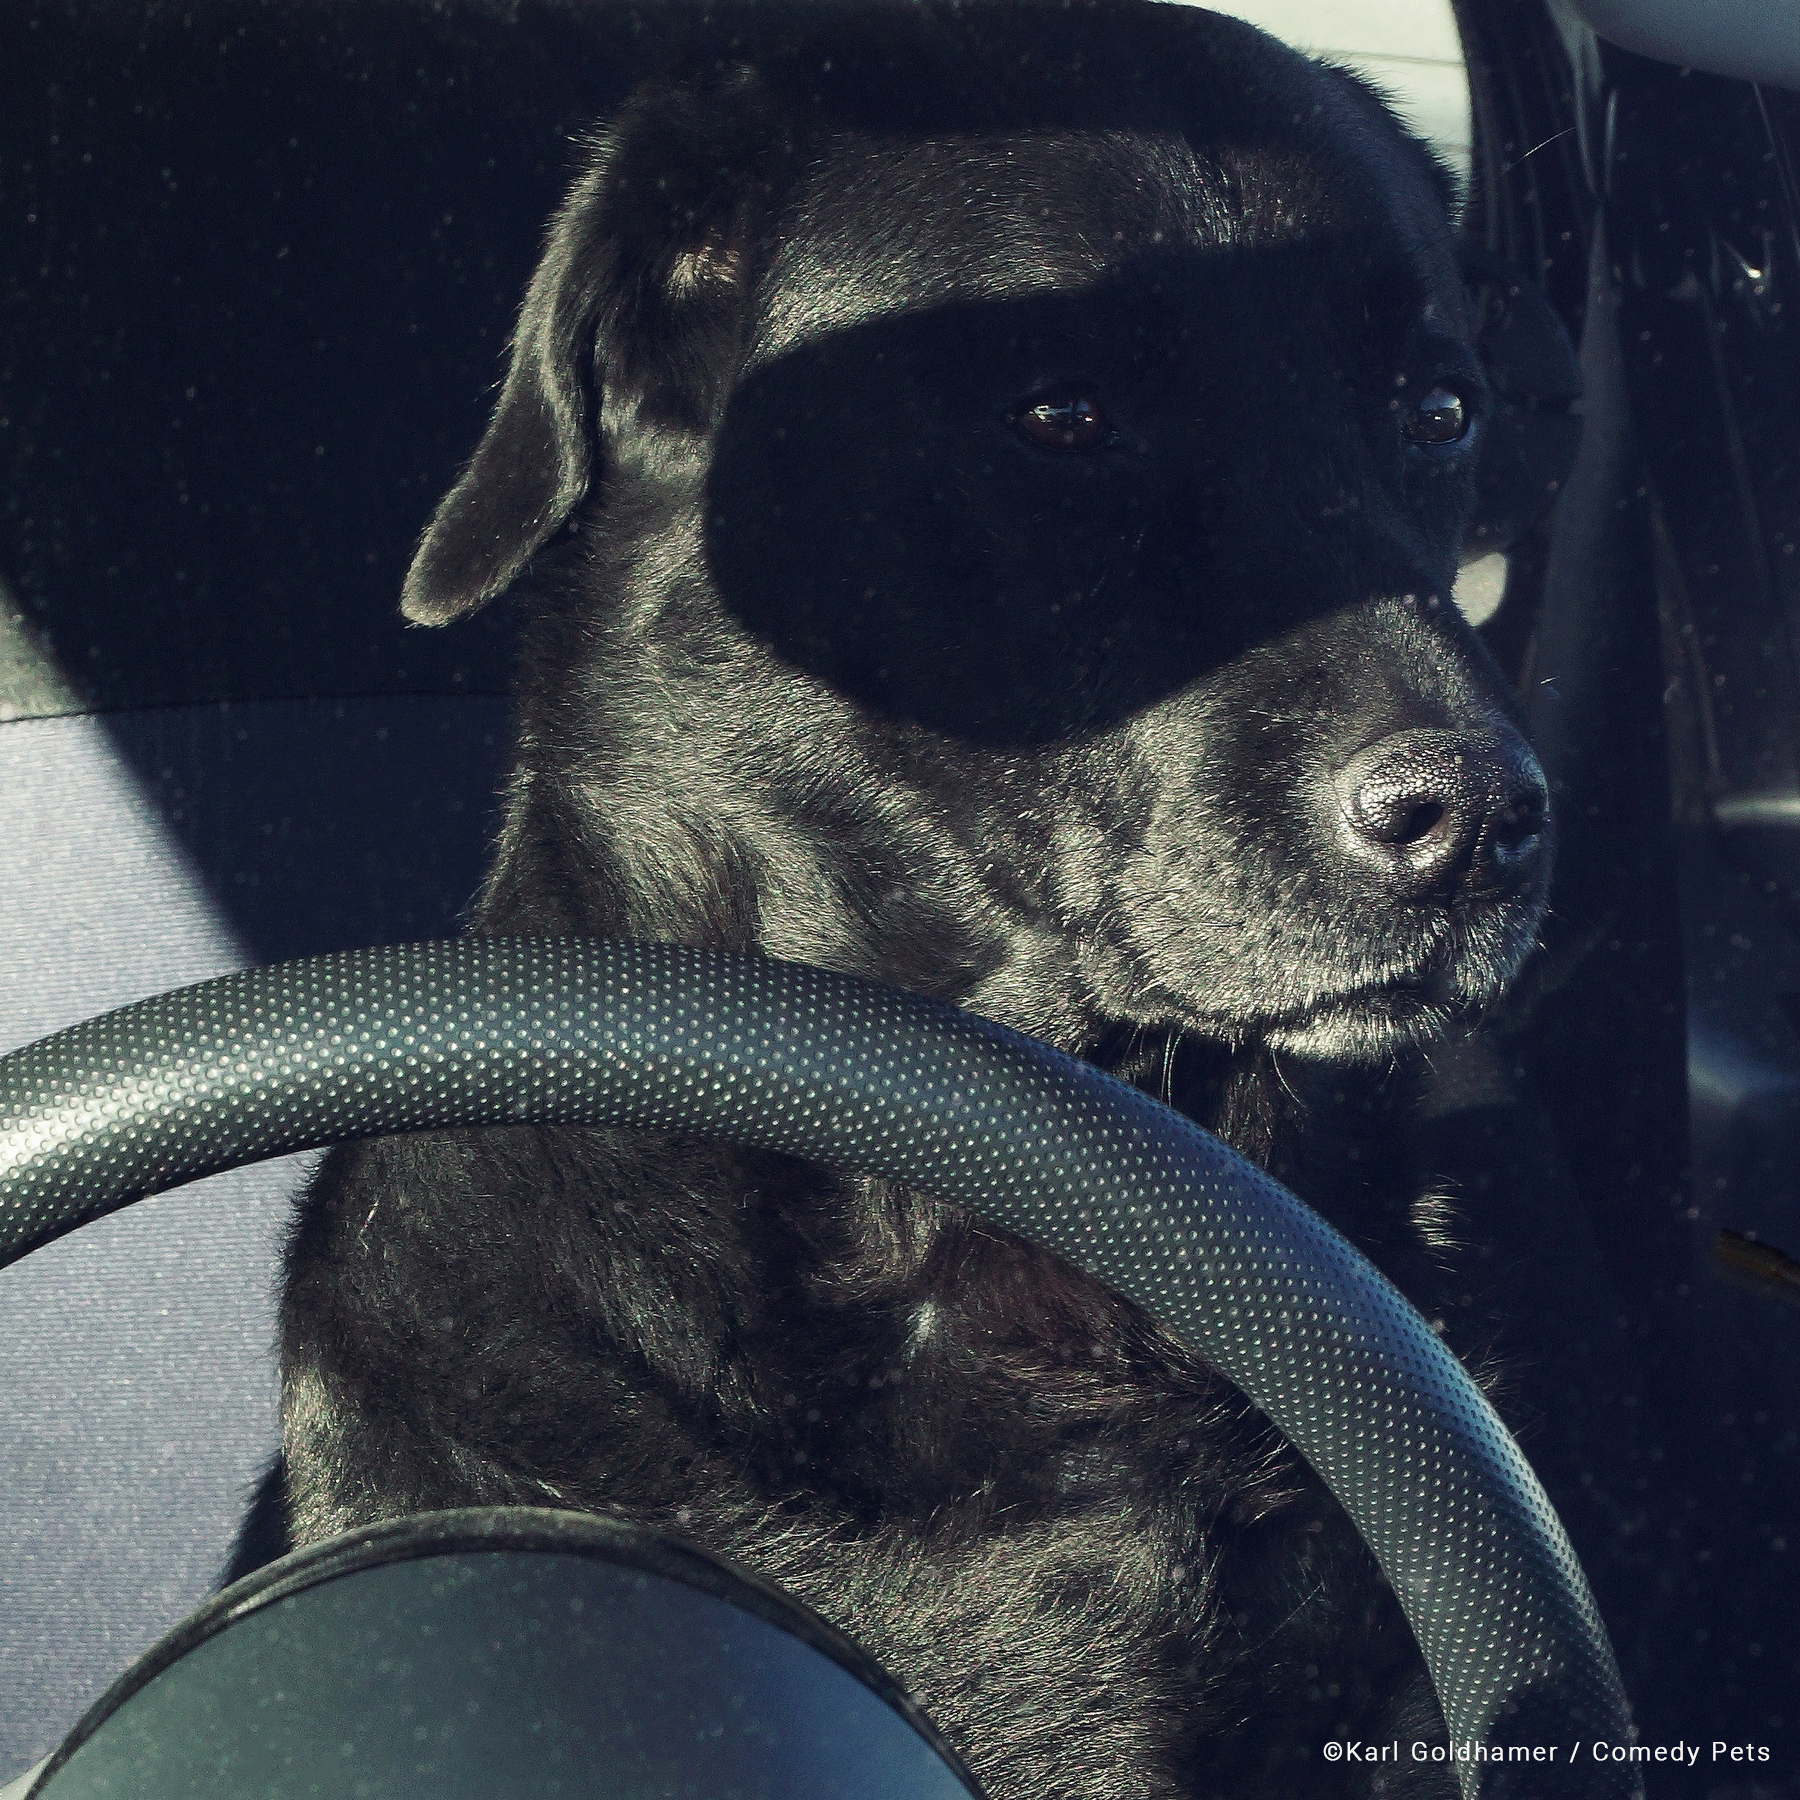 Black labrador at the wheel of a car with shadow across his eyes like Zorro's mask